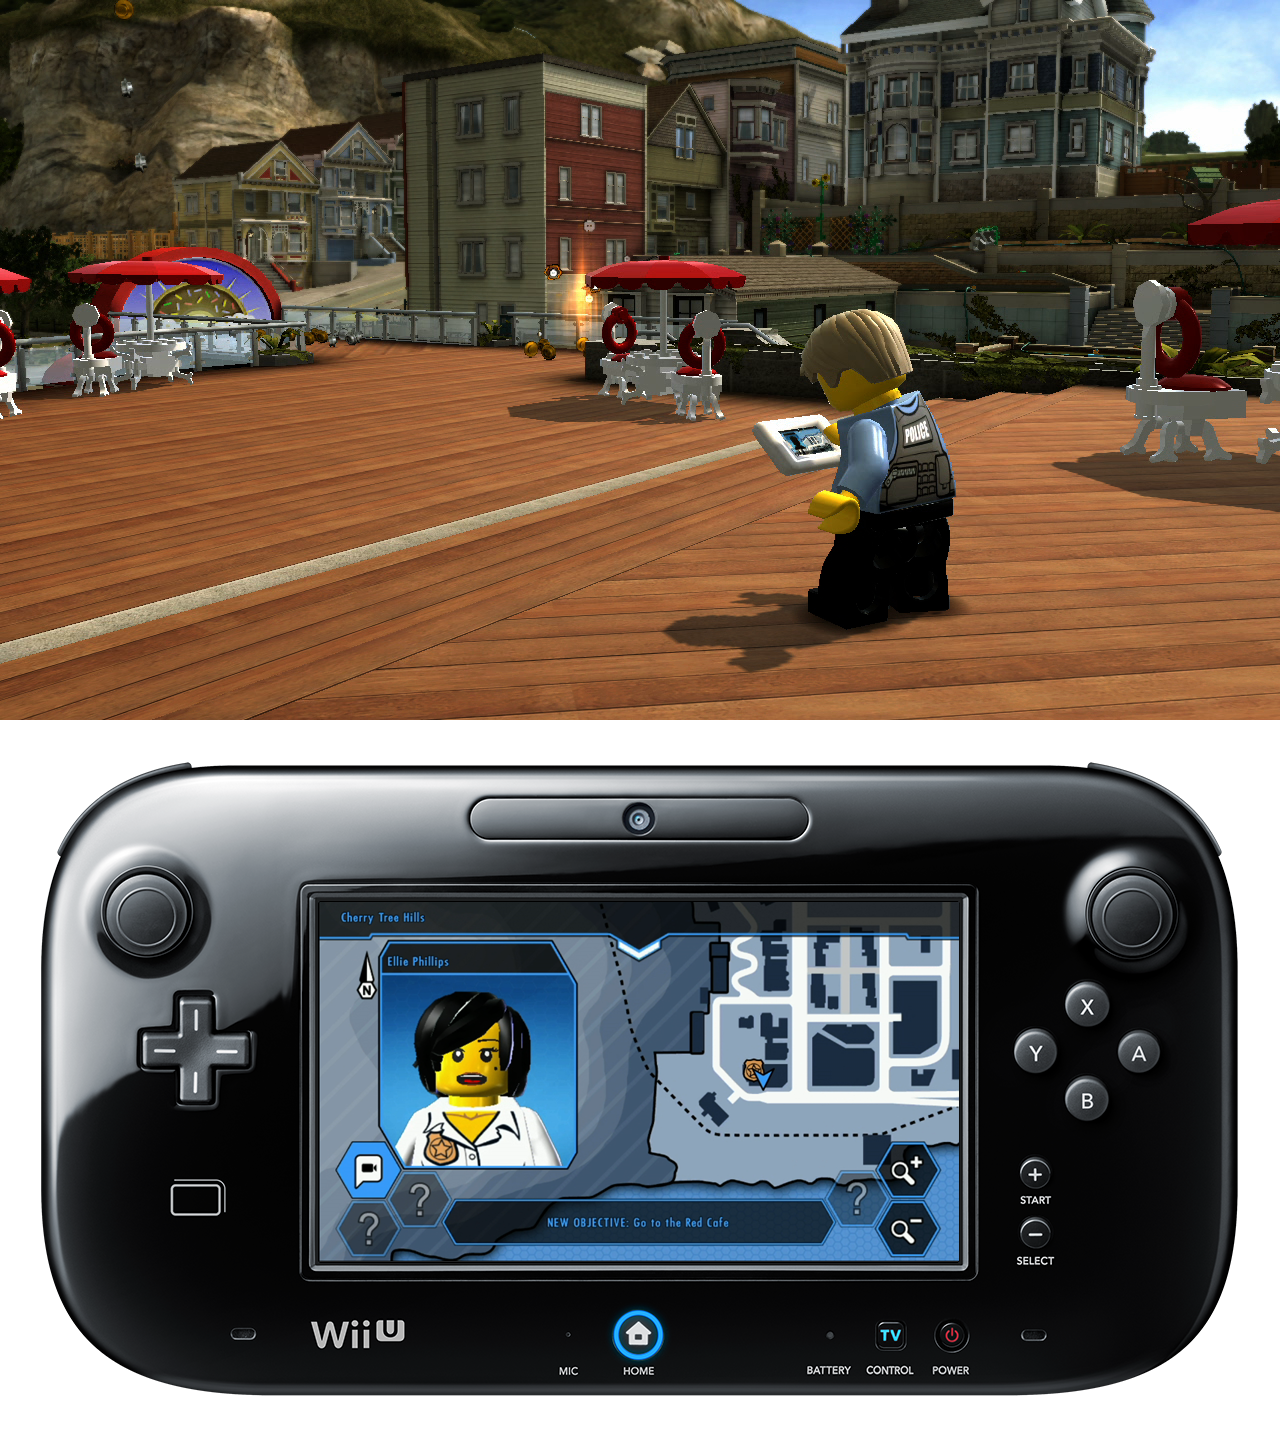 Lego City: Undercover Preview - Preview - Nintendo World Report